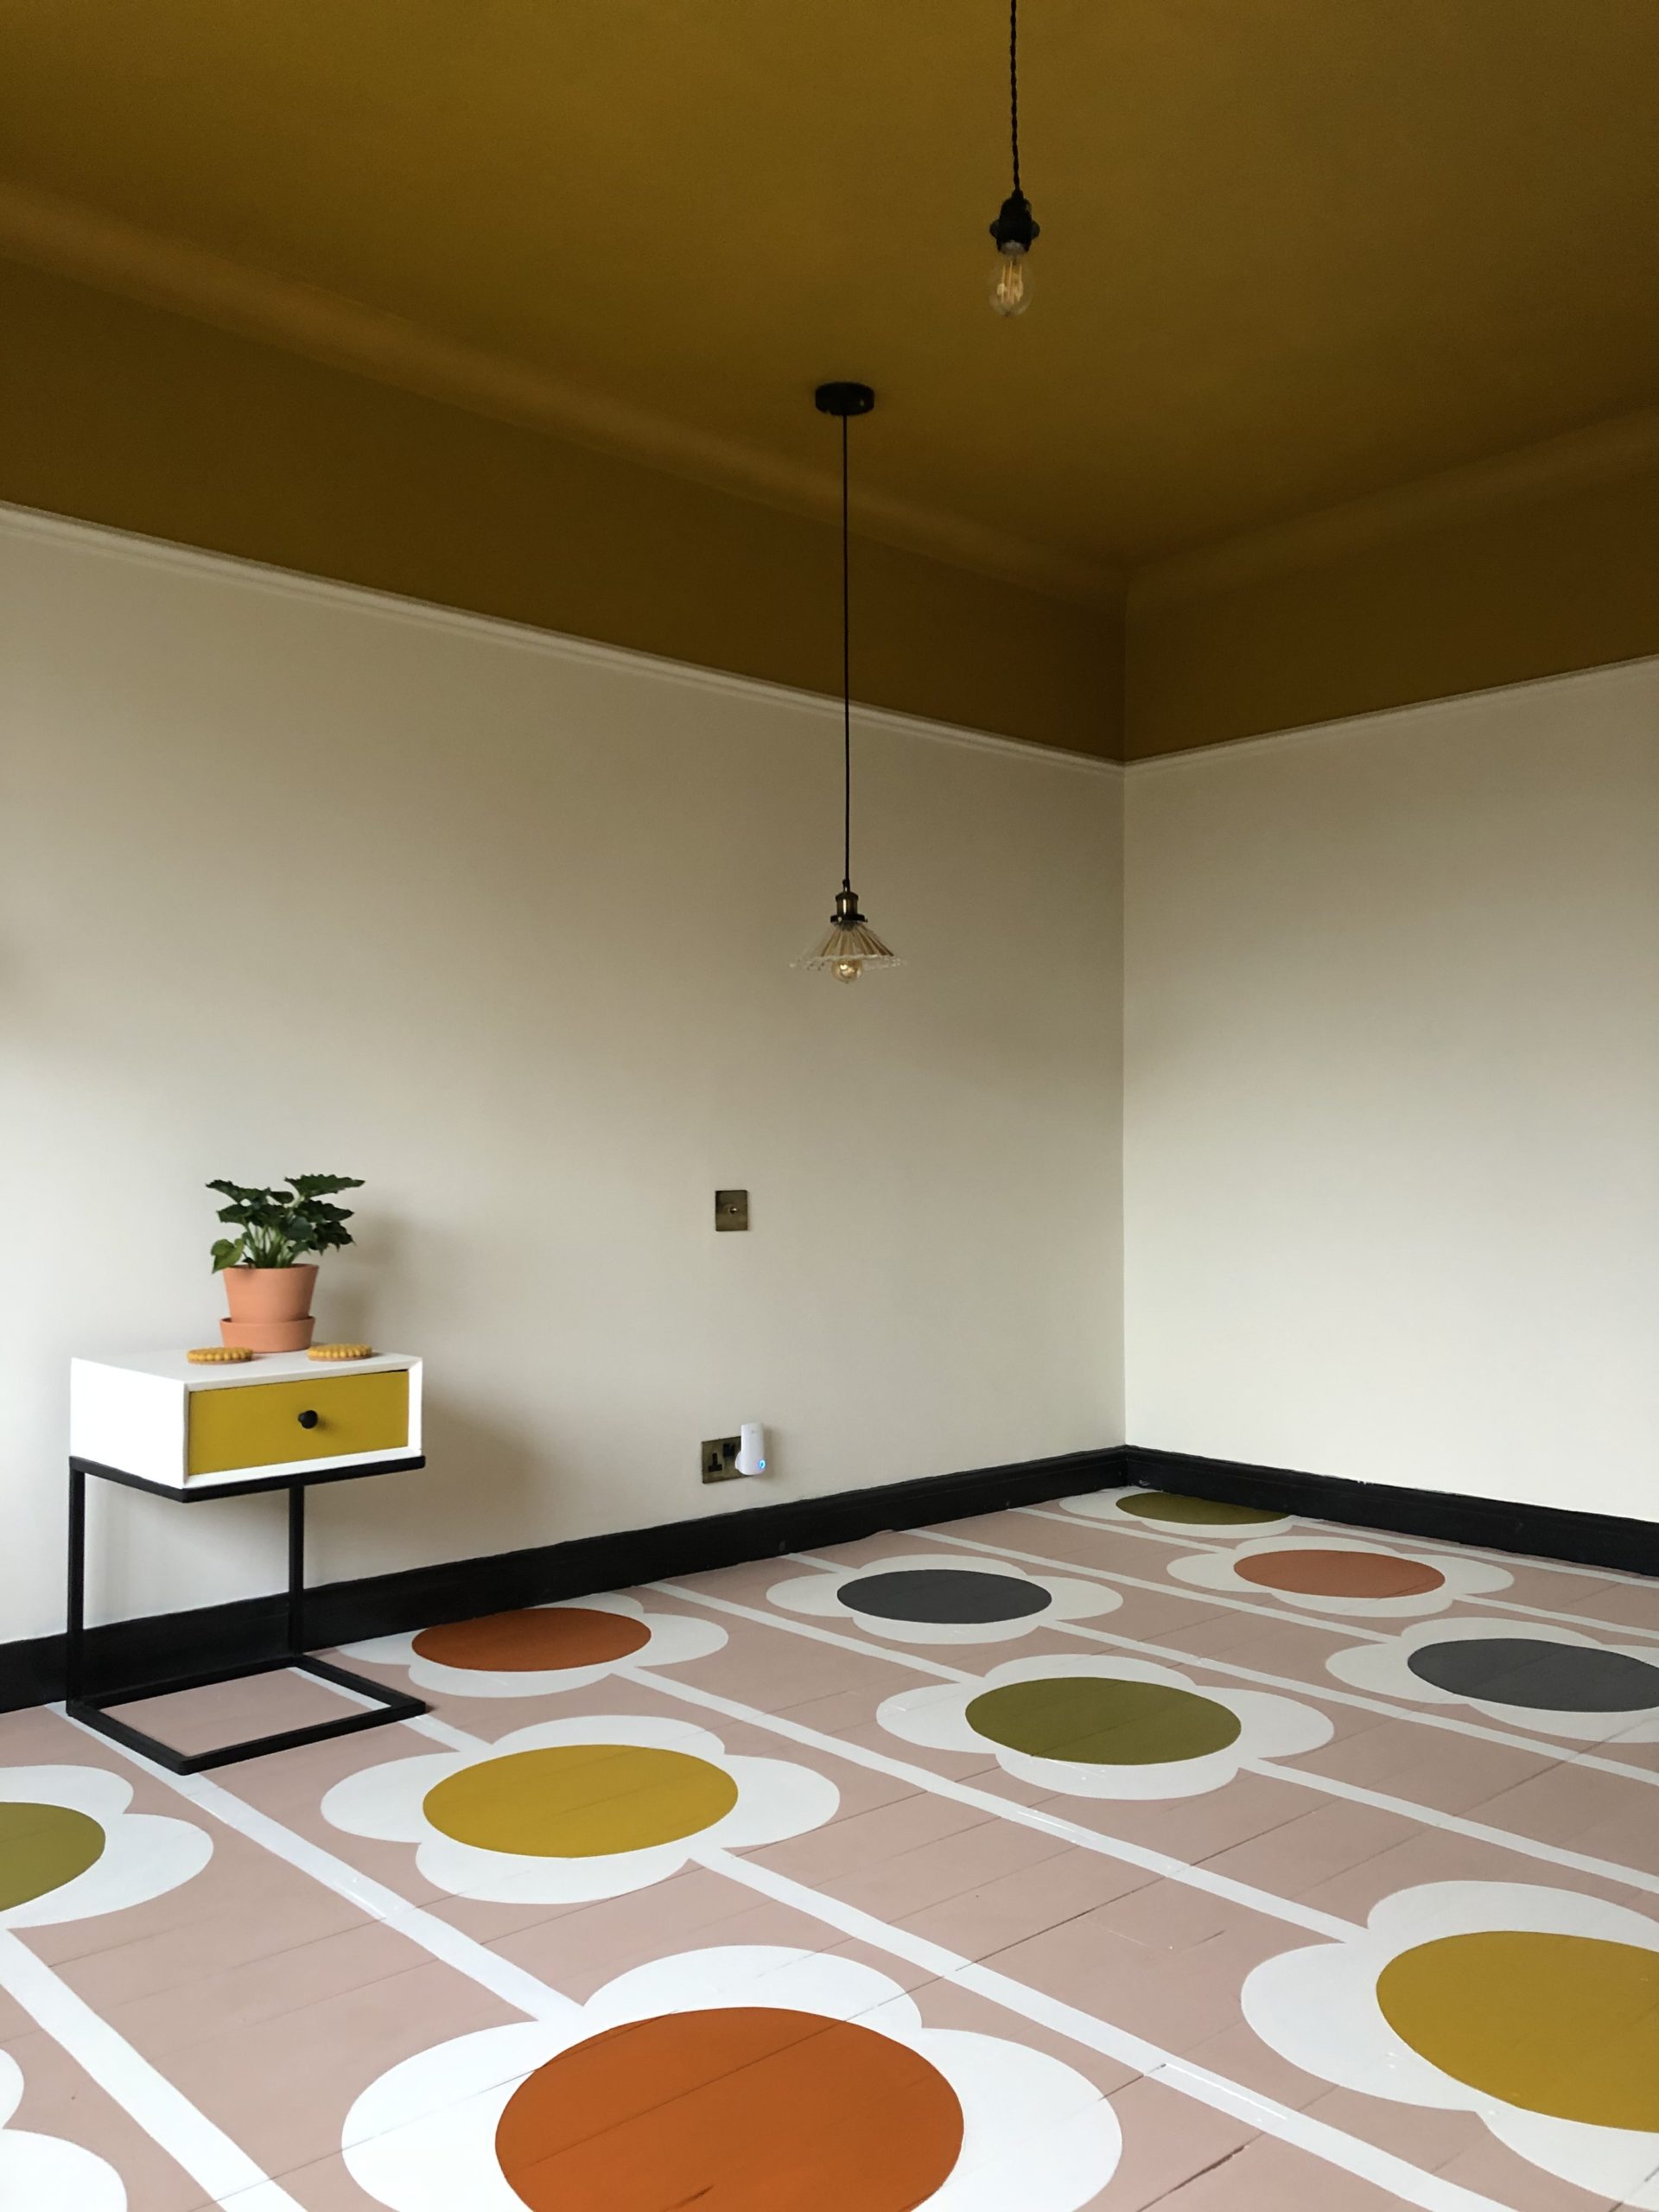 painted orla kiely floor by Emma Cooper from @ahouseonashbank